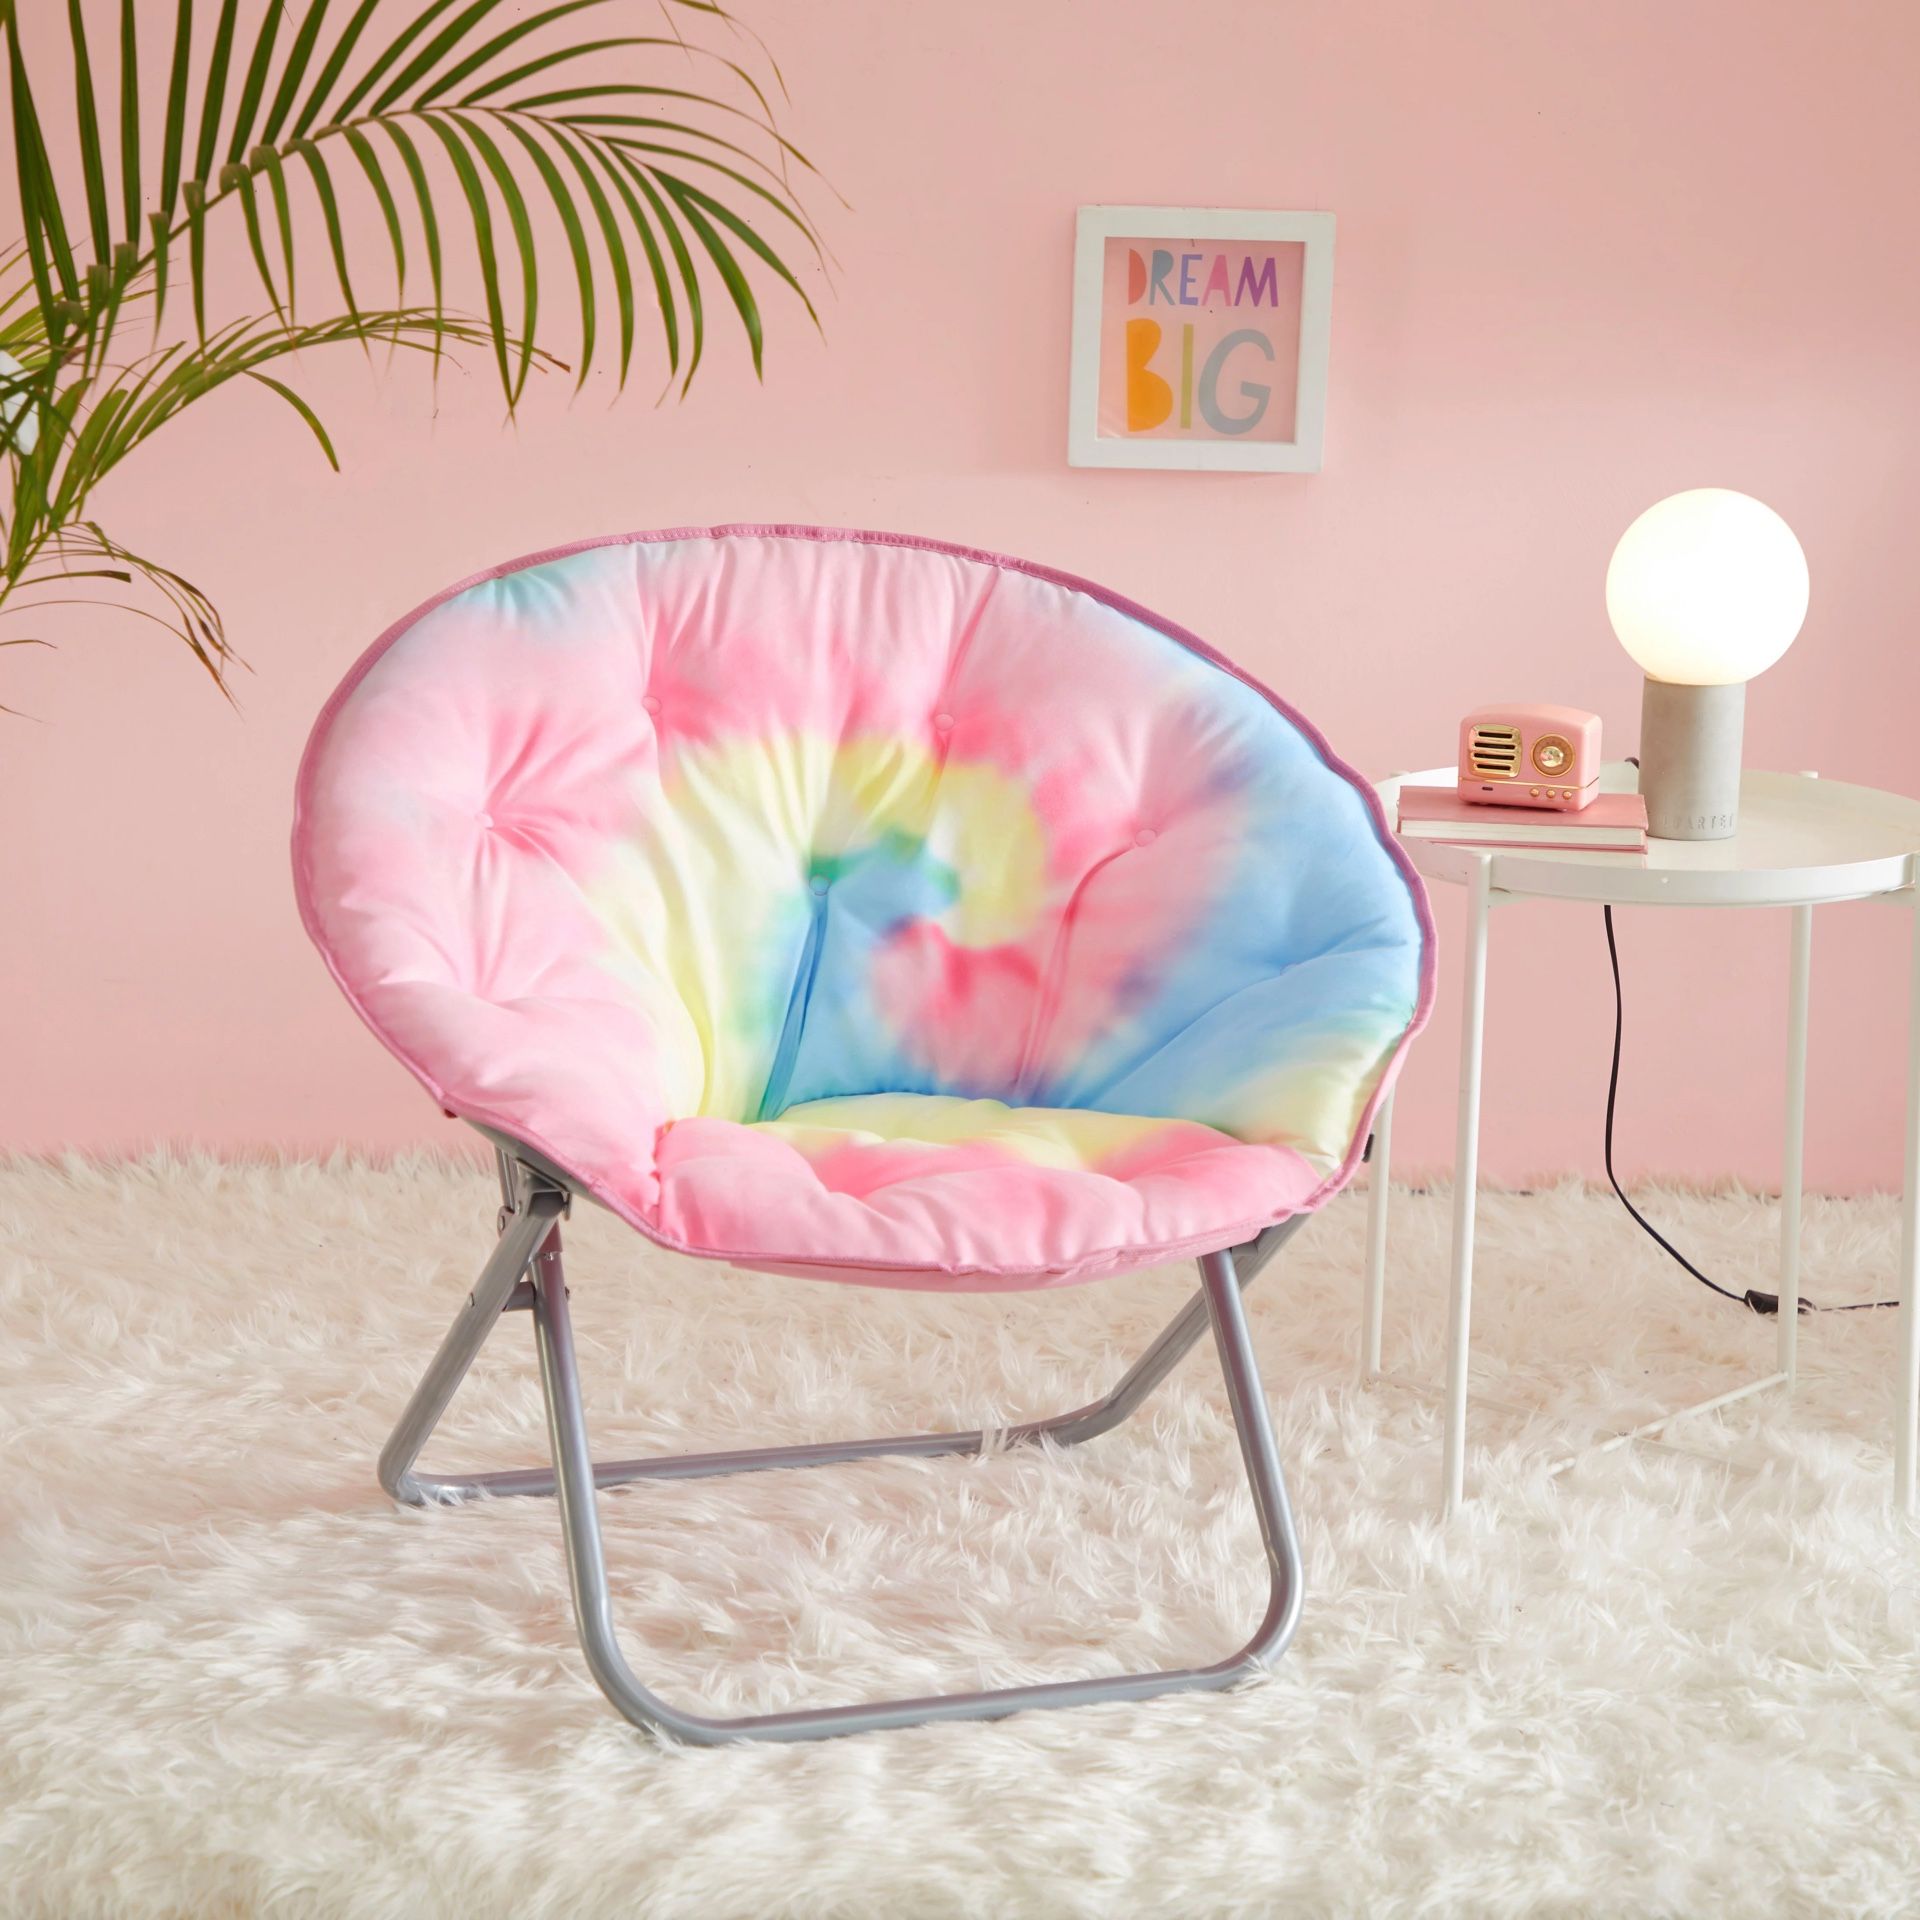 Justice Oval Oversized Faux Fur Saucer Chair with Holographic Trim, Multiple Colors Pink - 